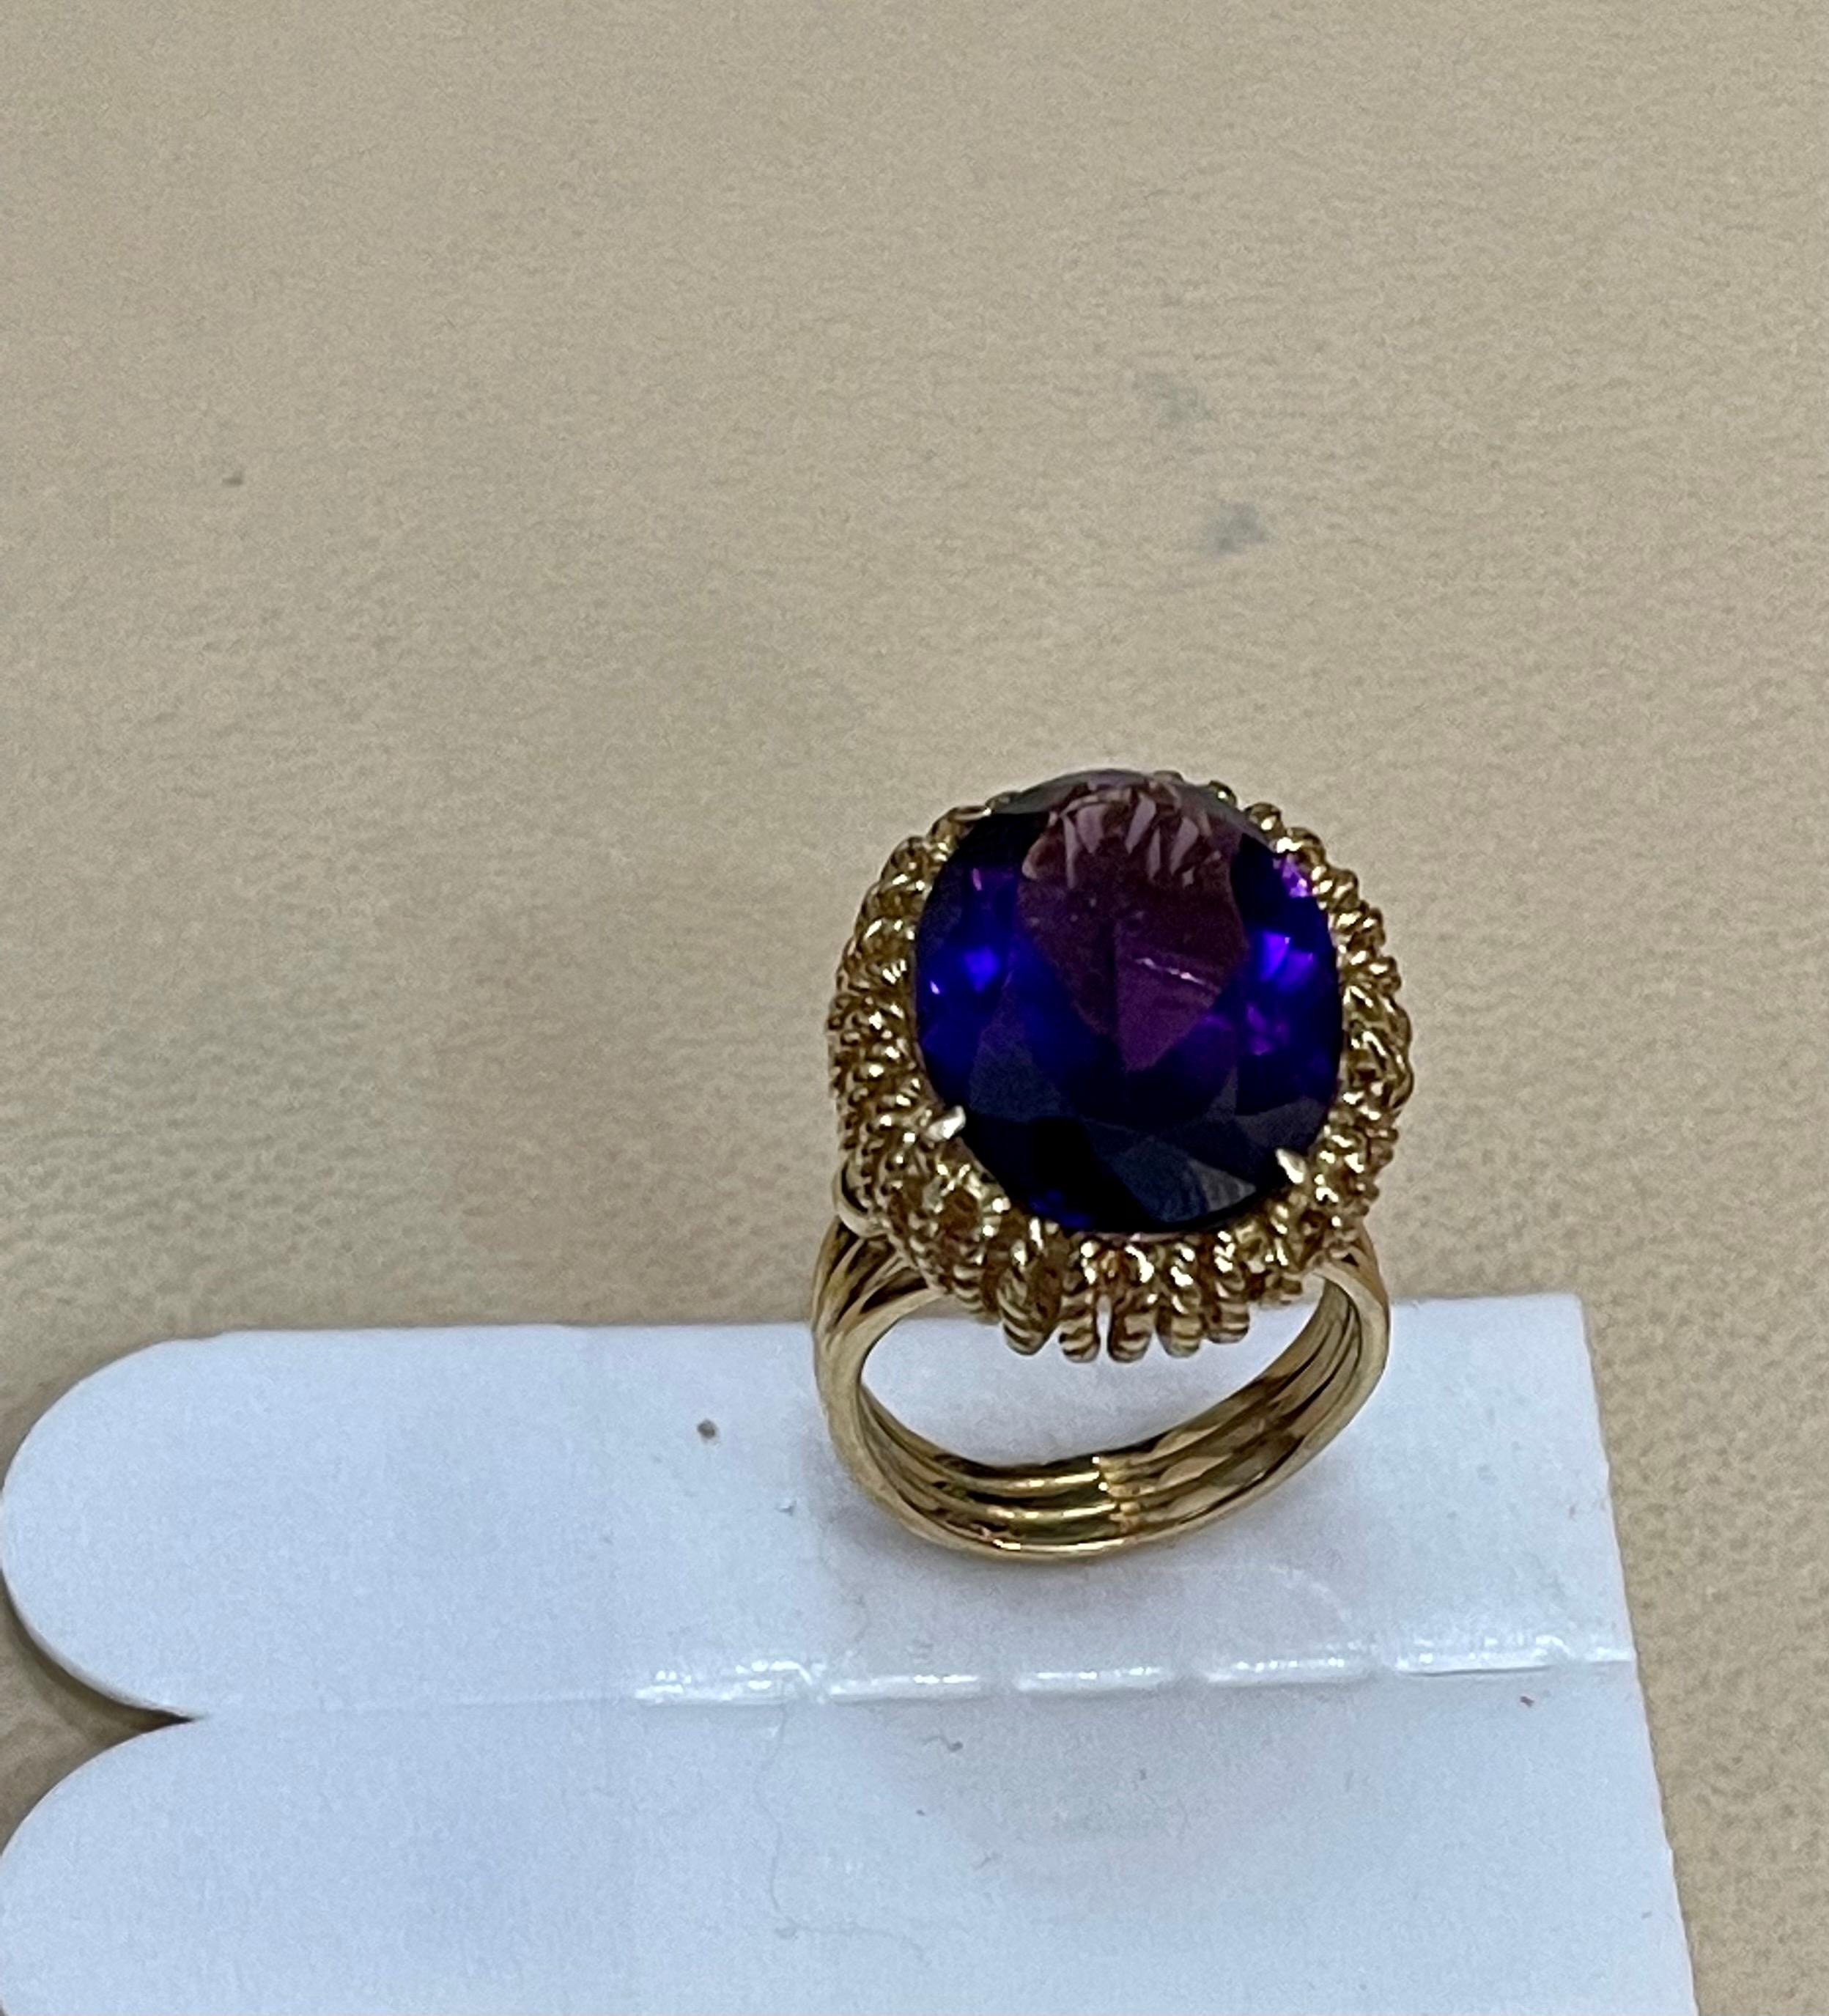 13 Carat Natural Oval Amethyst Cocktail Ring in 18 Karat Yellow Gold, Estate In Excellent Condition For Sale In New York, NY